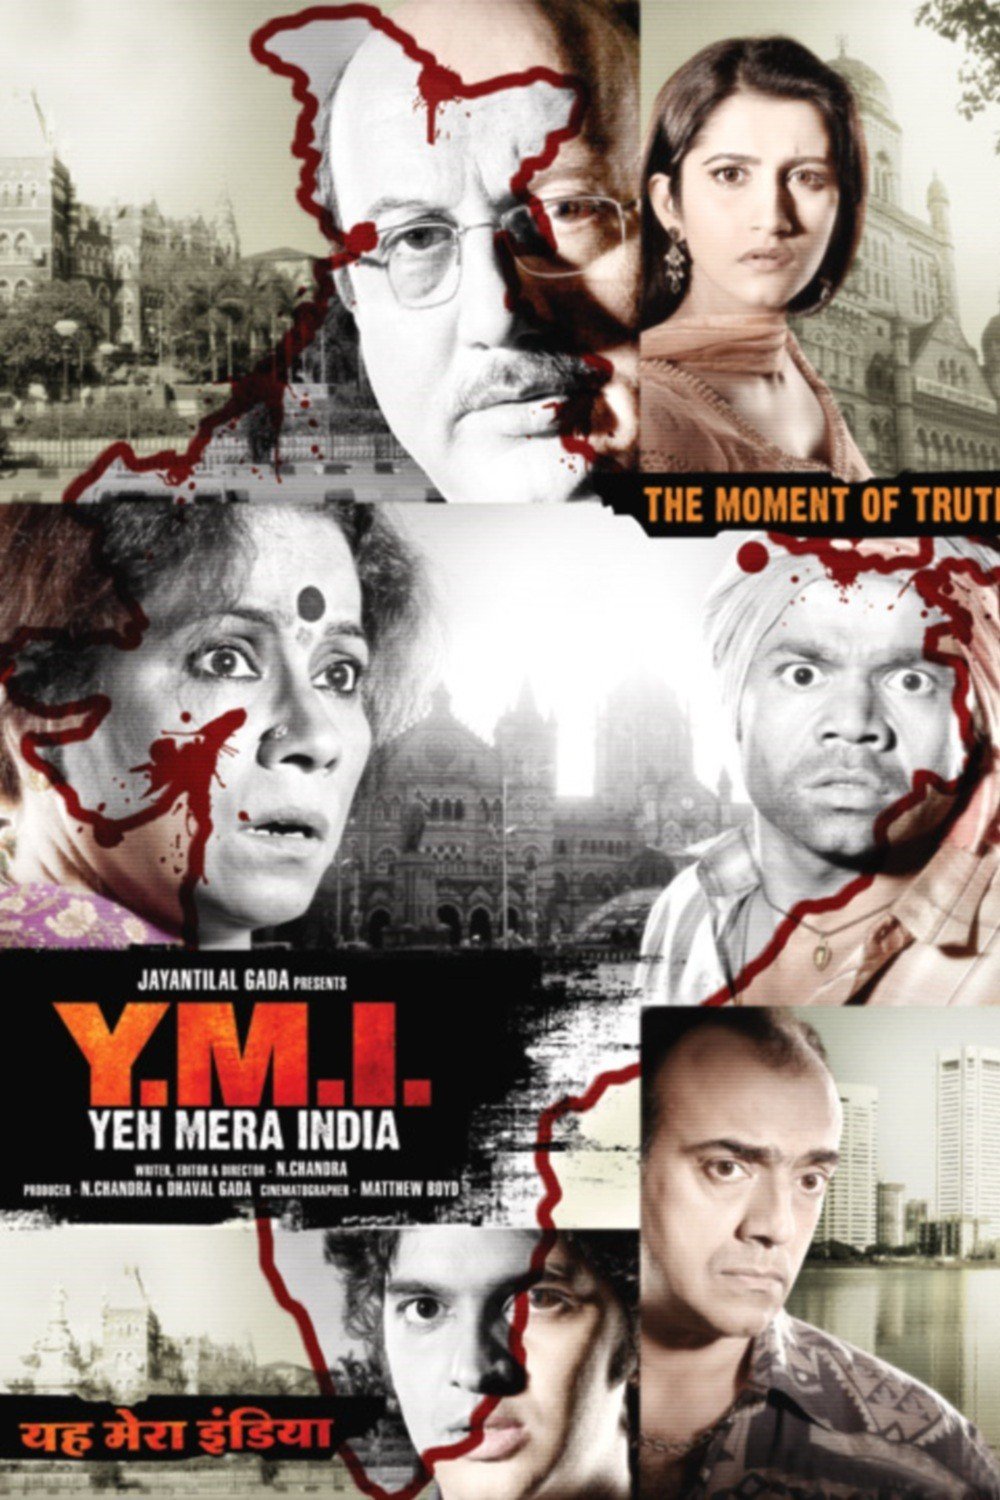 Y.M.I. – Yeh Mera India Movie: Review | Release Date (2009) | Songs